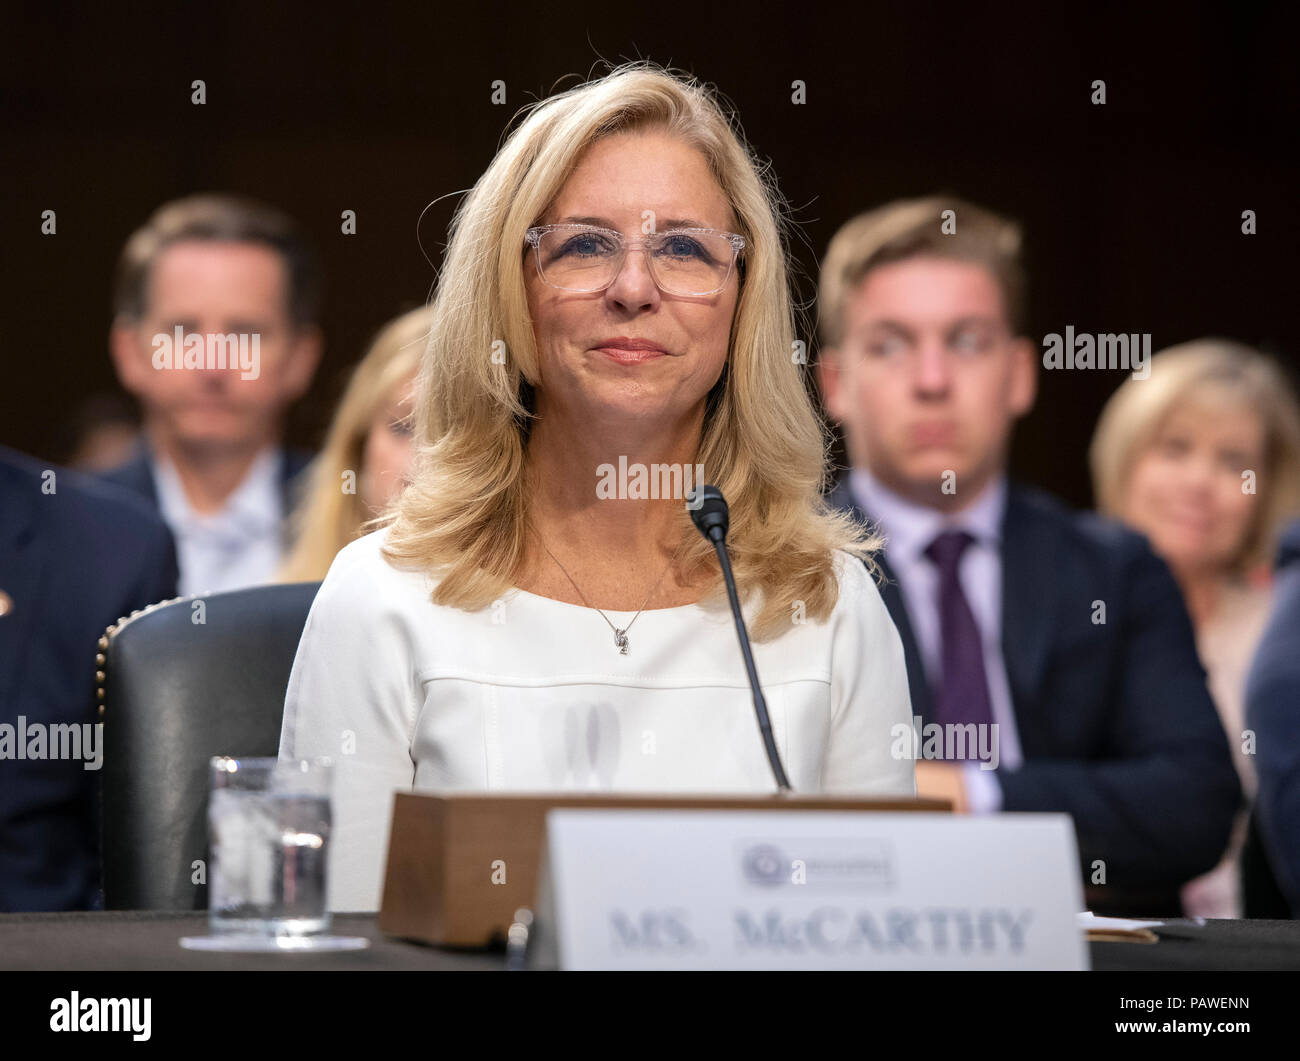 Ellen E. McCarthy testifies before the United States Senate Select Committee on Intelligence on her nomination to be an Assistant Secretary of State (Intelligence and Research), on Capitol Hill in Washington, DC on Wednesday, July 25, 2018. Credit: Ron Sachs/CNP /MediaPunch Stock Photo